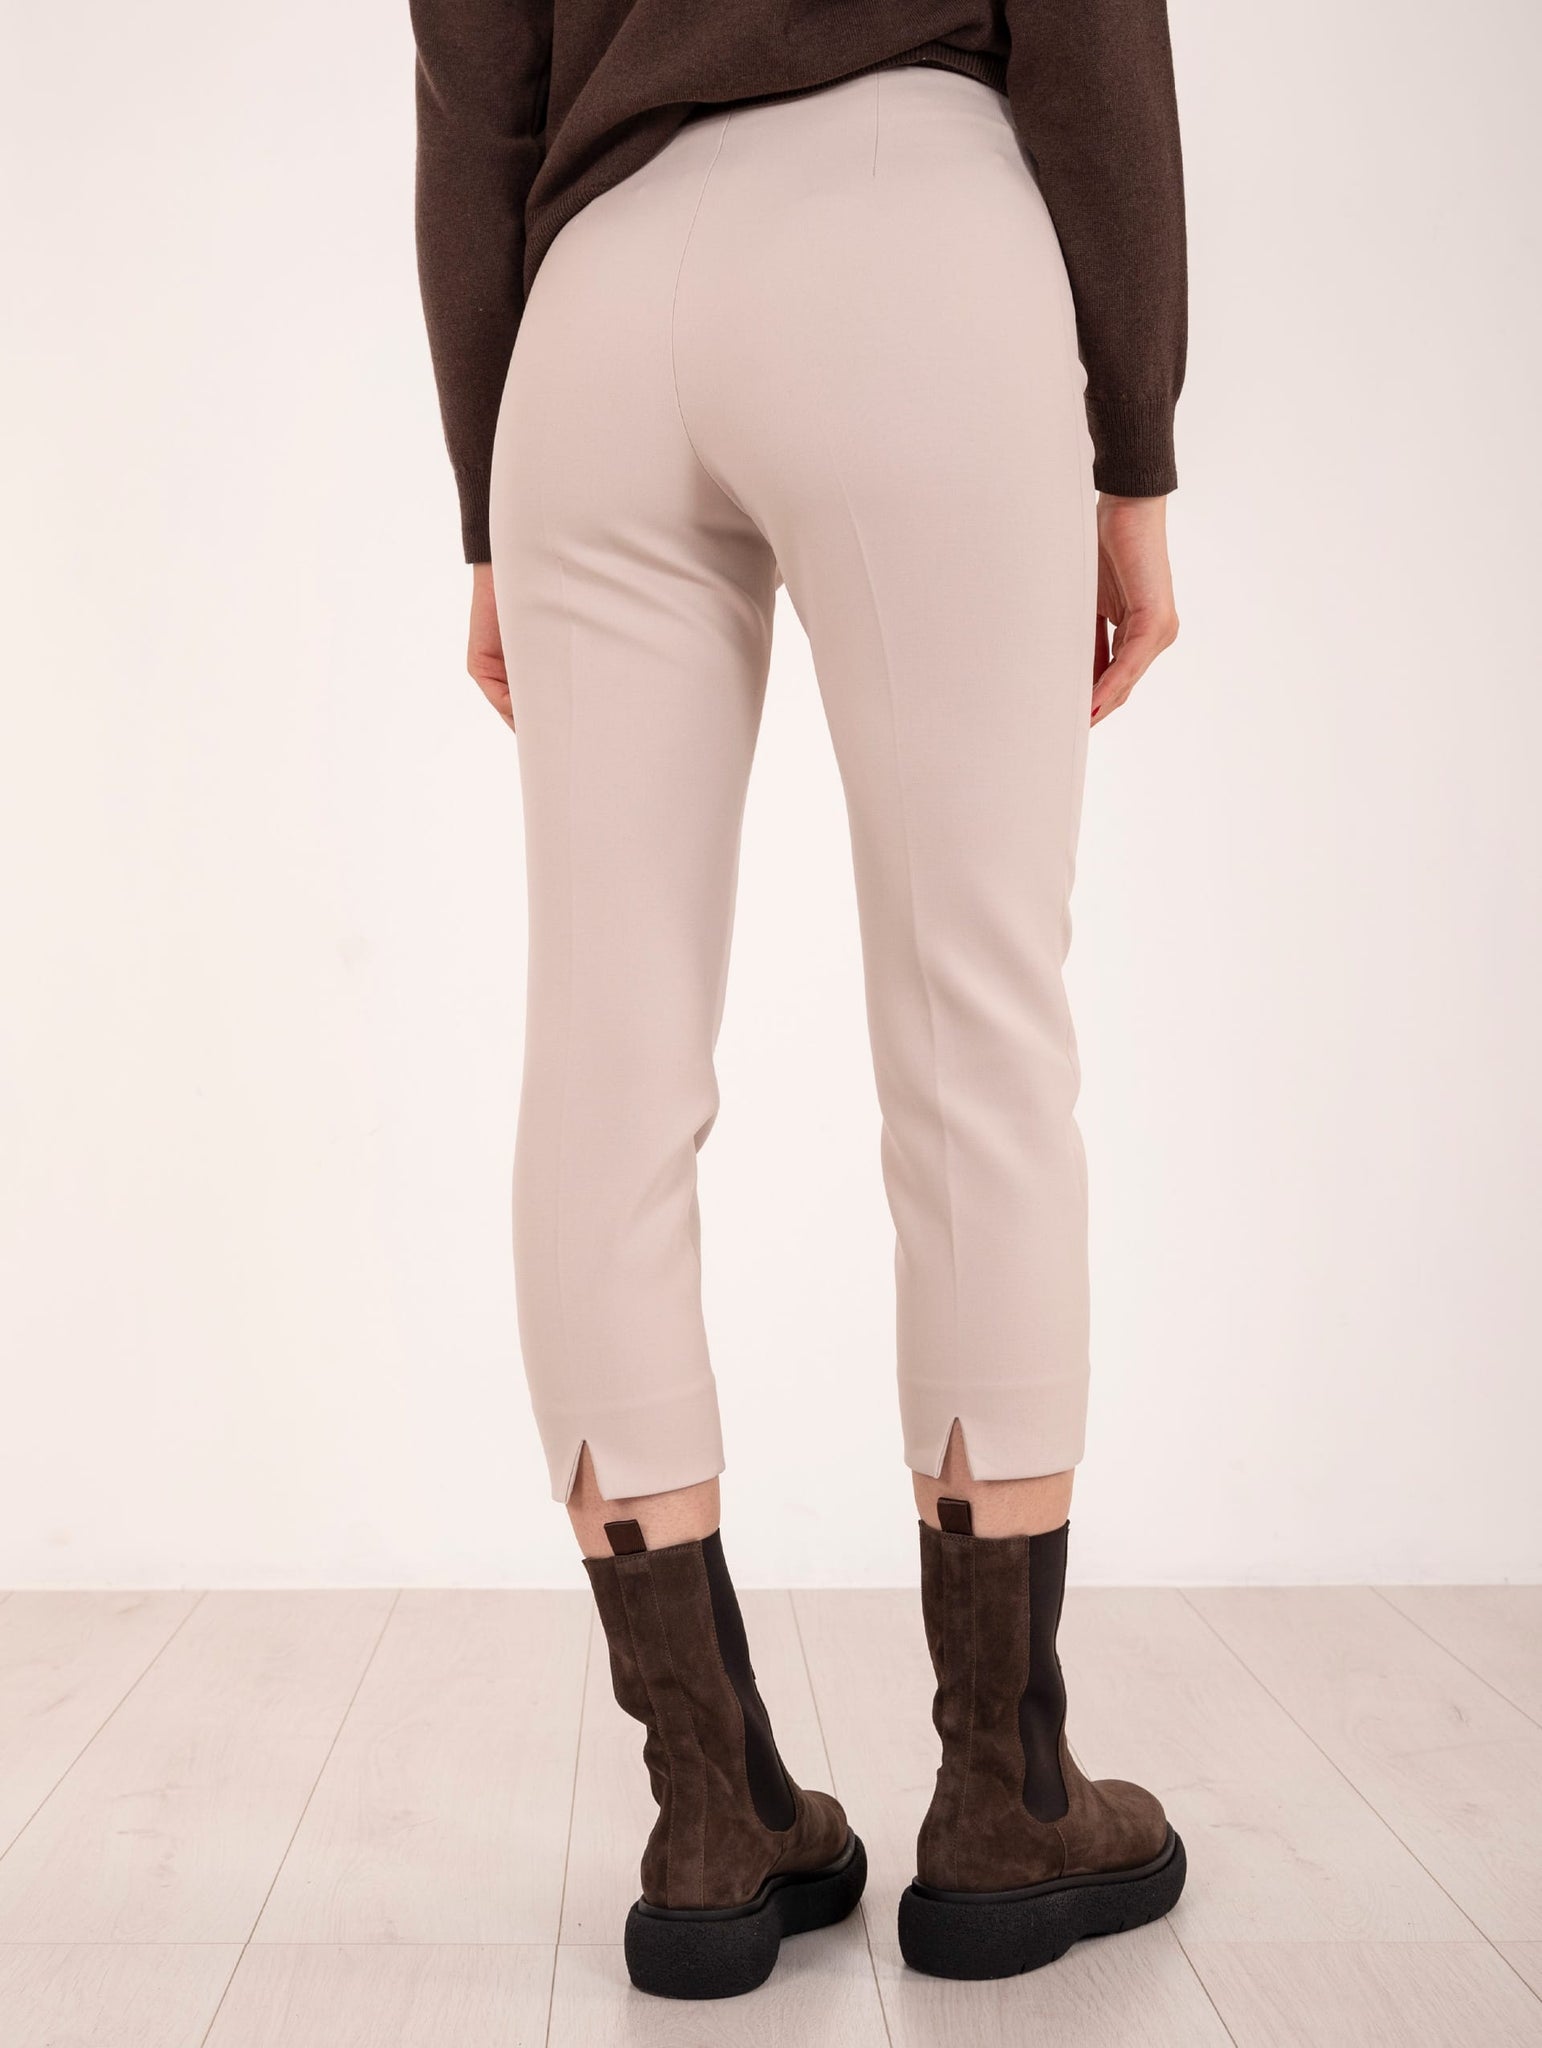 Pantalone Peserico a Sigaretta in Tela Double Bistretch Marmo